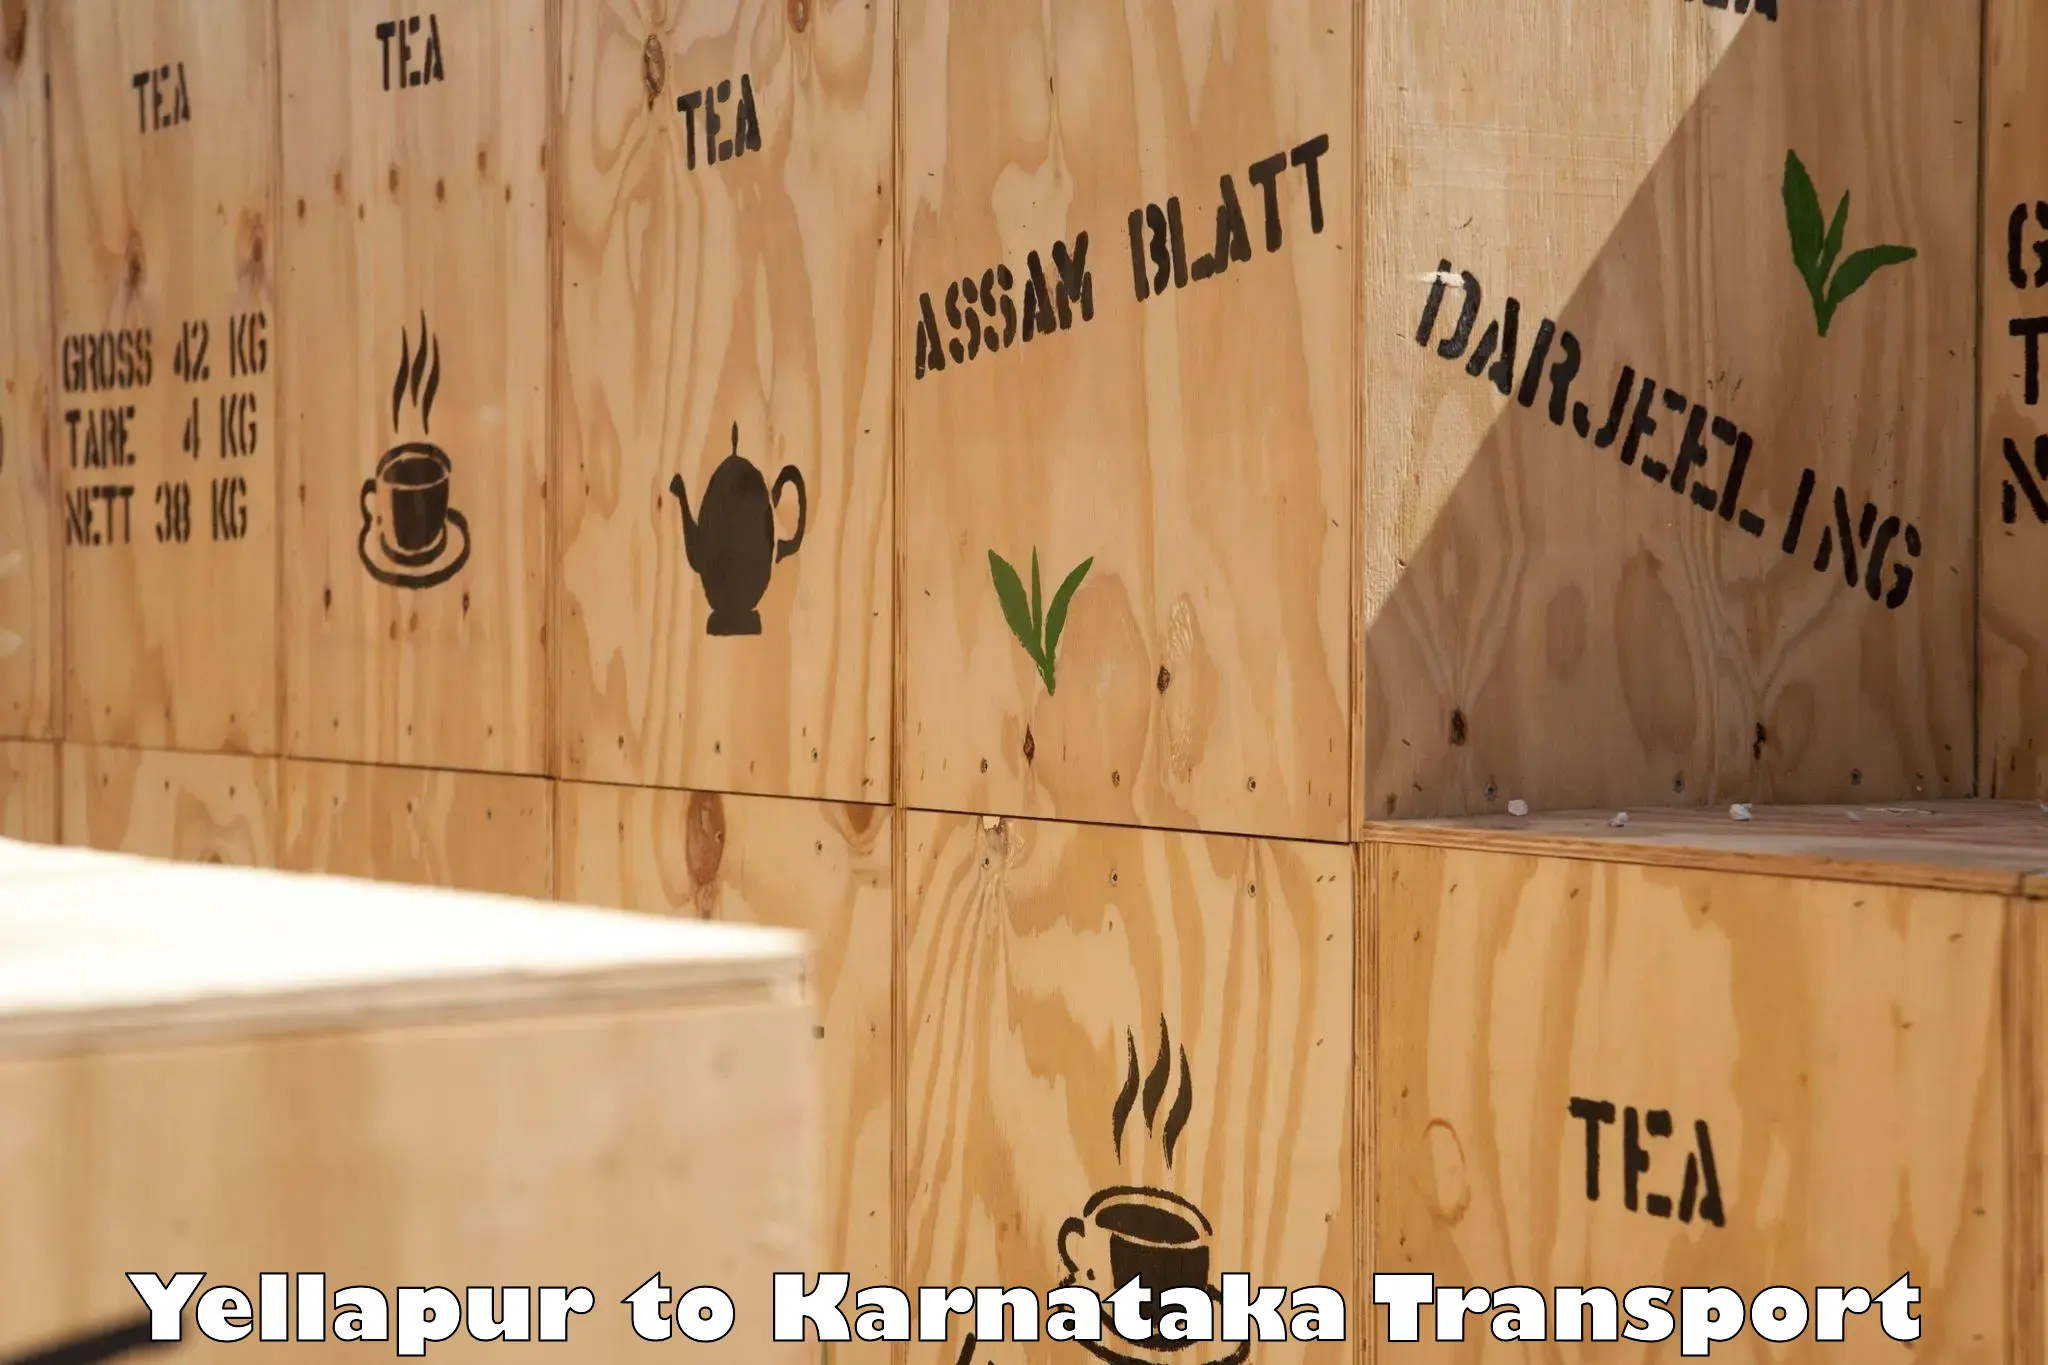 Container transport service Yellapur to Davangere